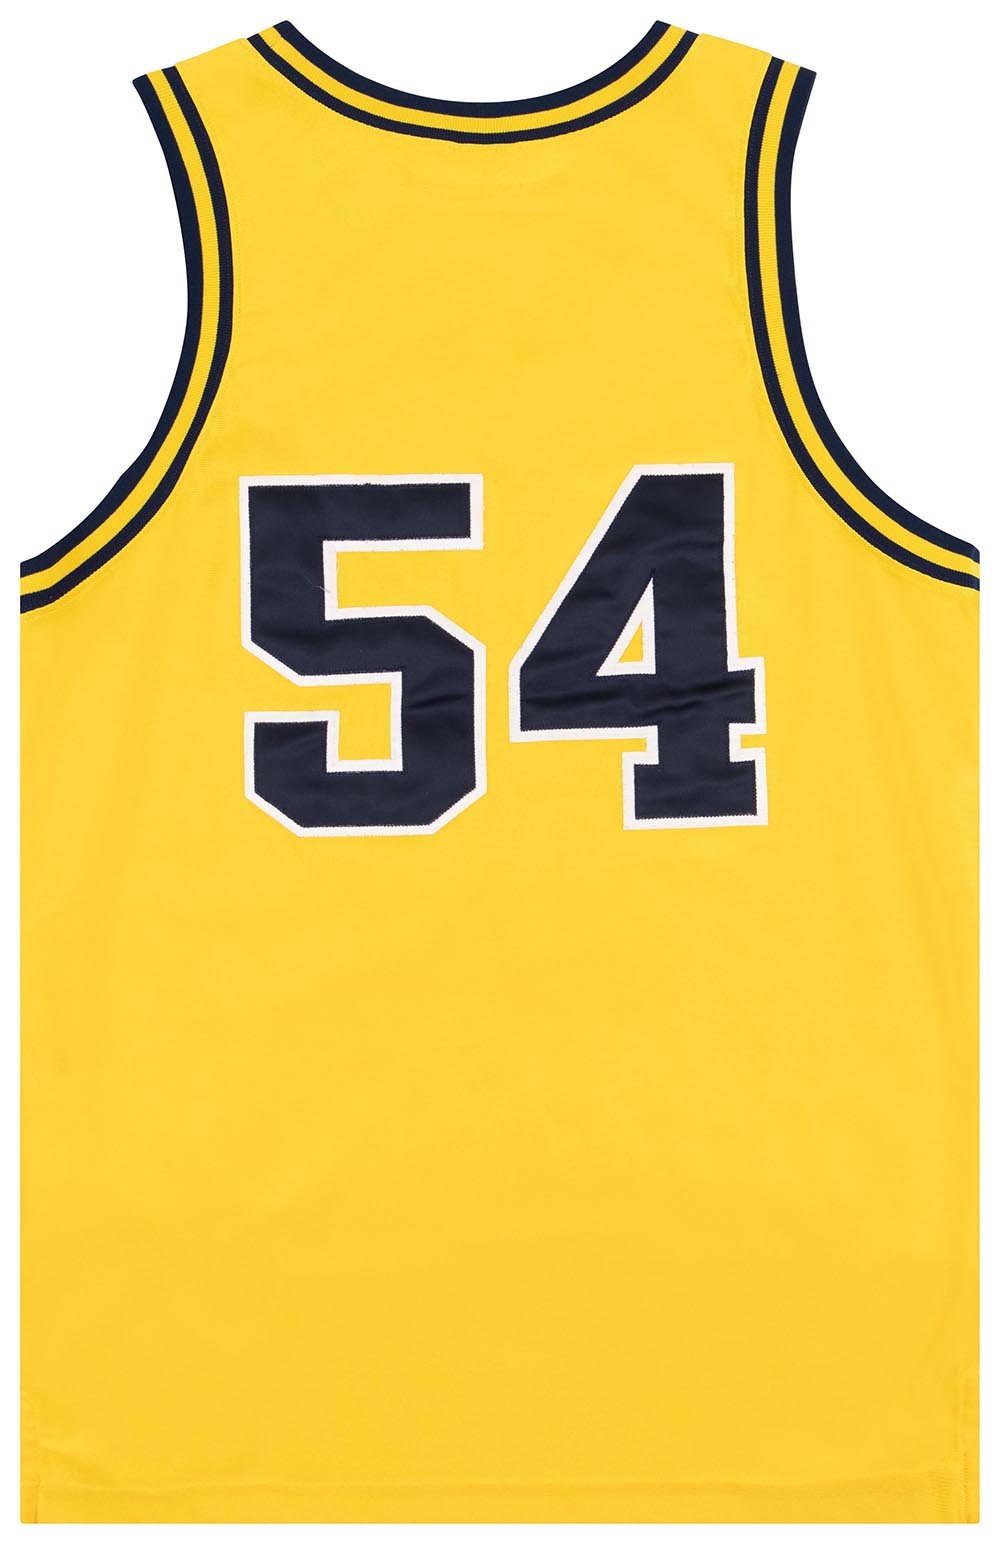 1996-98 AUTHENTIC MICHIGAN WOLVERINES TRAYLOR #54 NIKE JERSEY (ALTERNATE) L